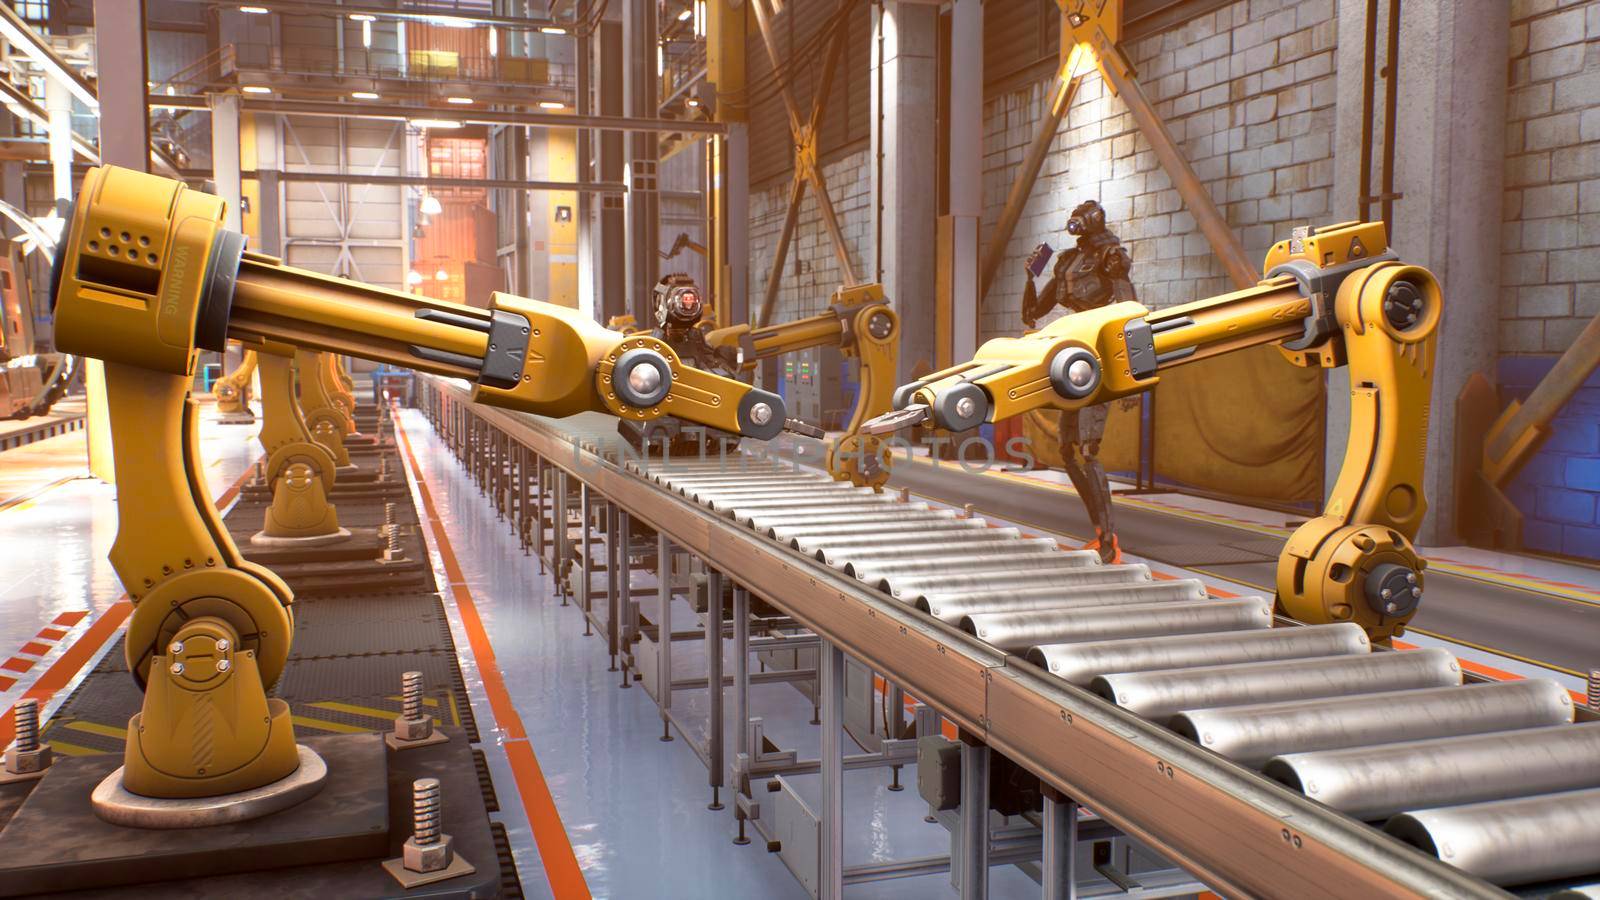 Automated robotic assembly line. Robotics works in a production line of robot parts in a factory. Technology and automation. 3D Rendering. by designprojects